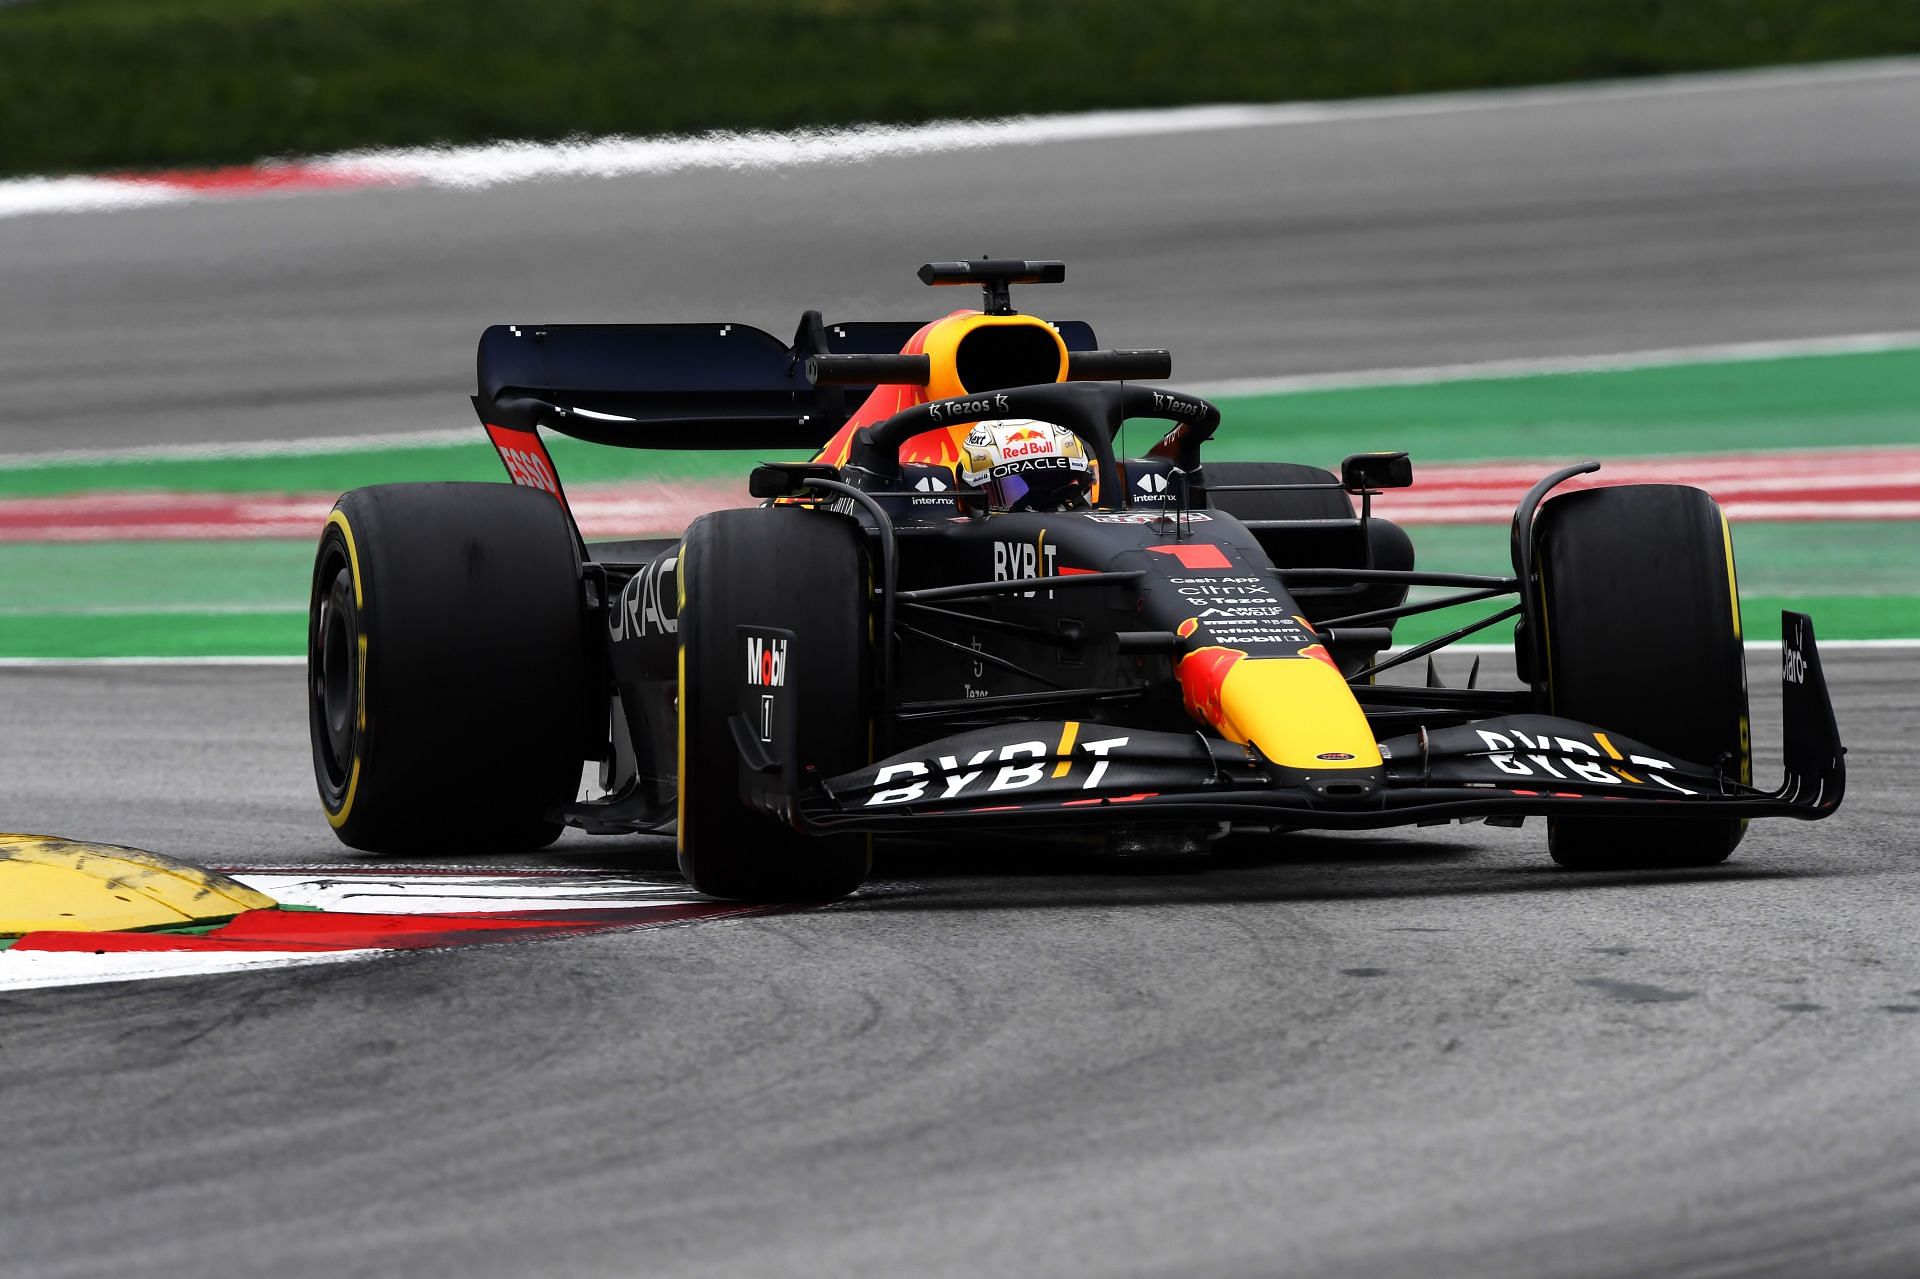 Max Verstappen running the #1 on his car during pre-season testing in Barcelona (Photo by Rudy Carezzevoli/Getty Images)